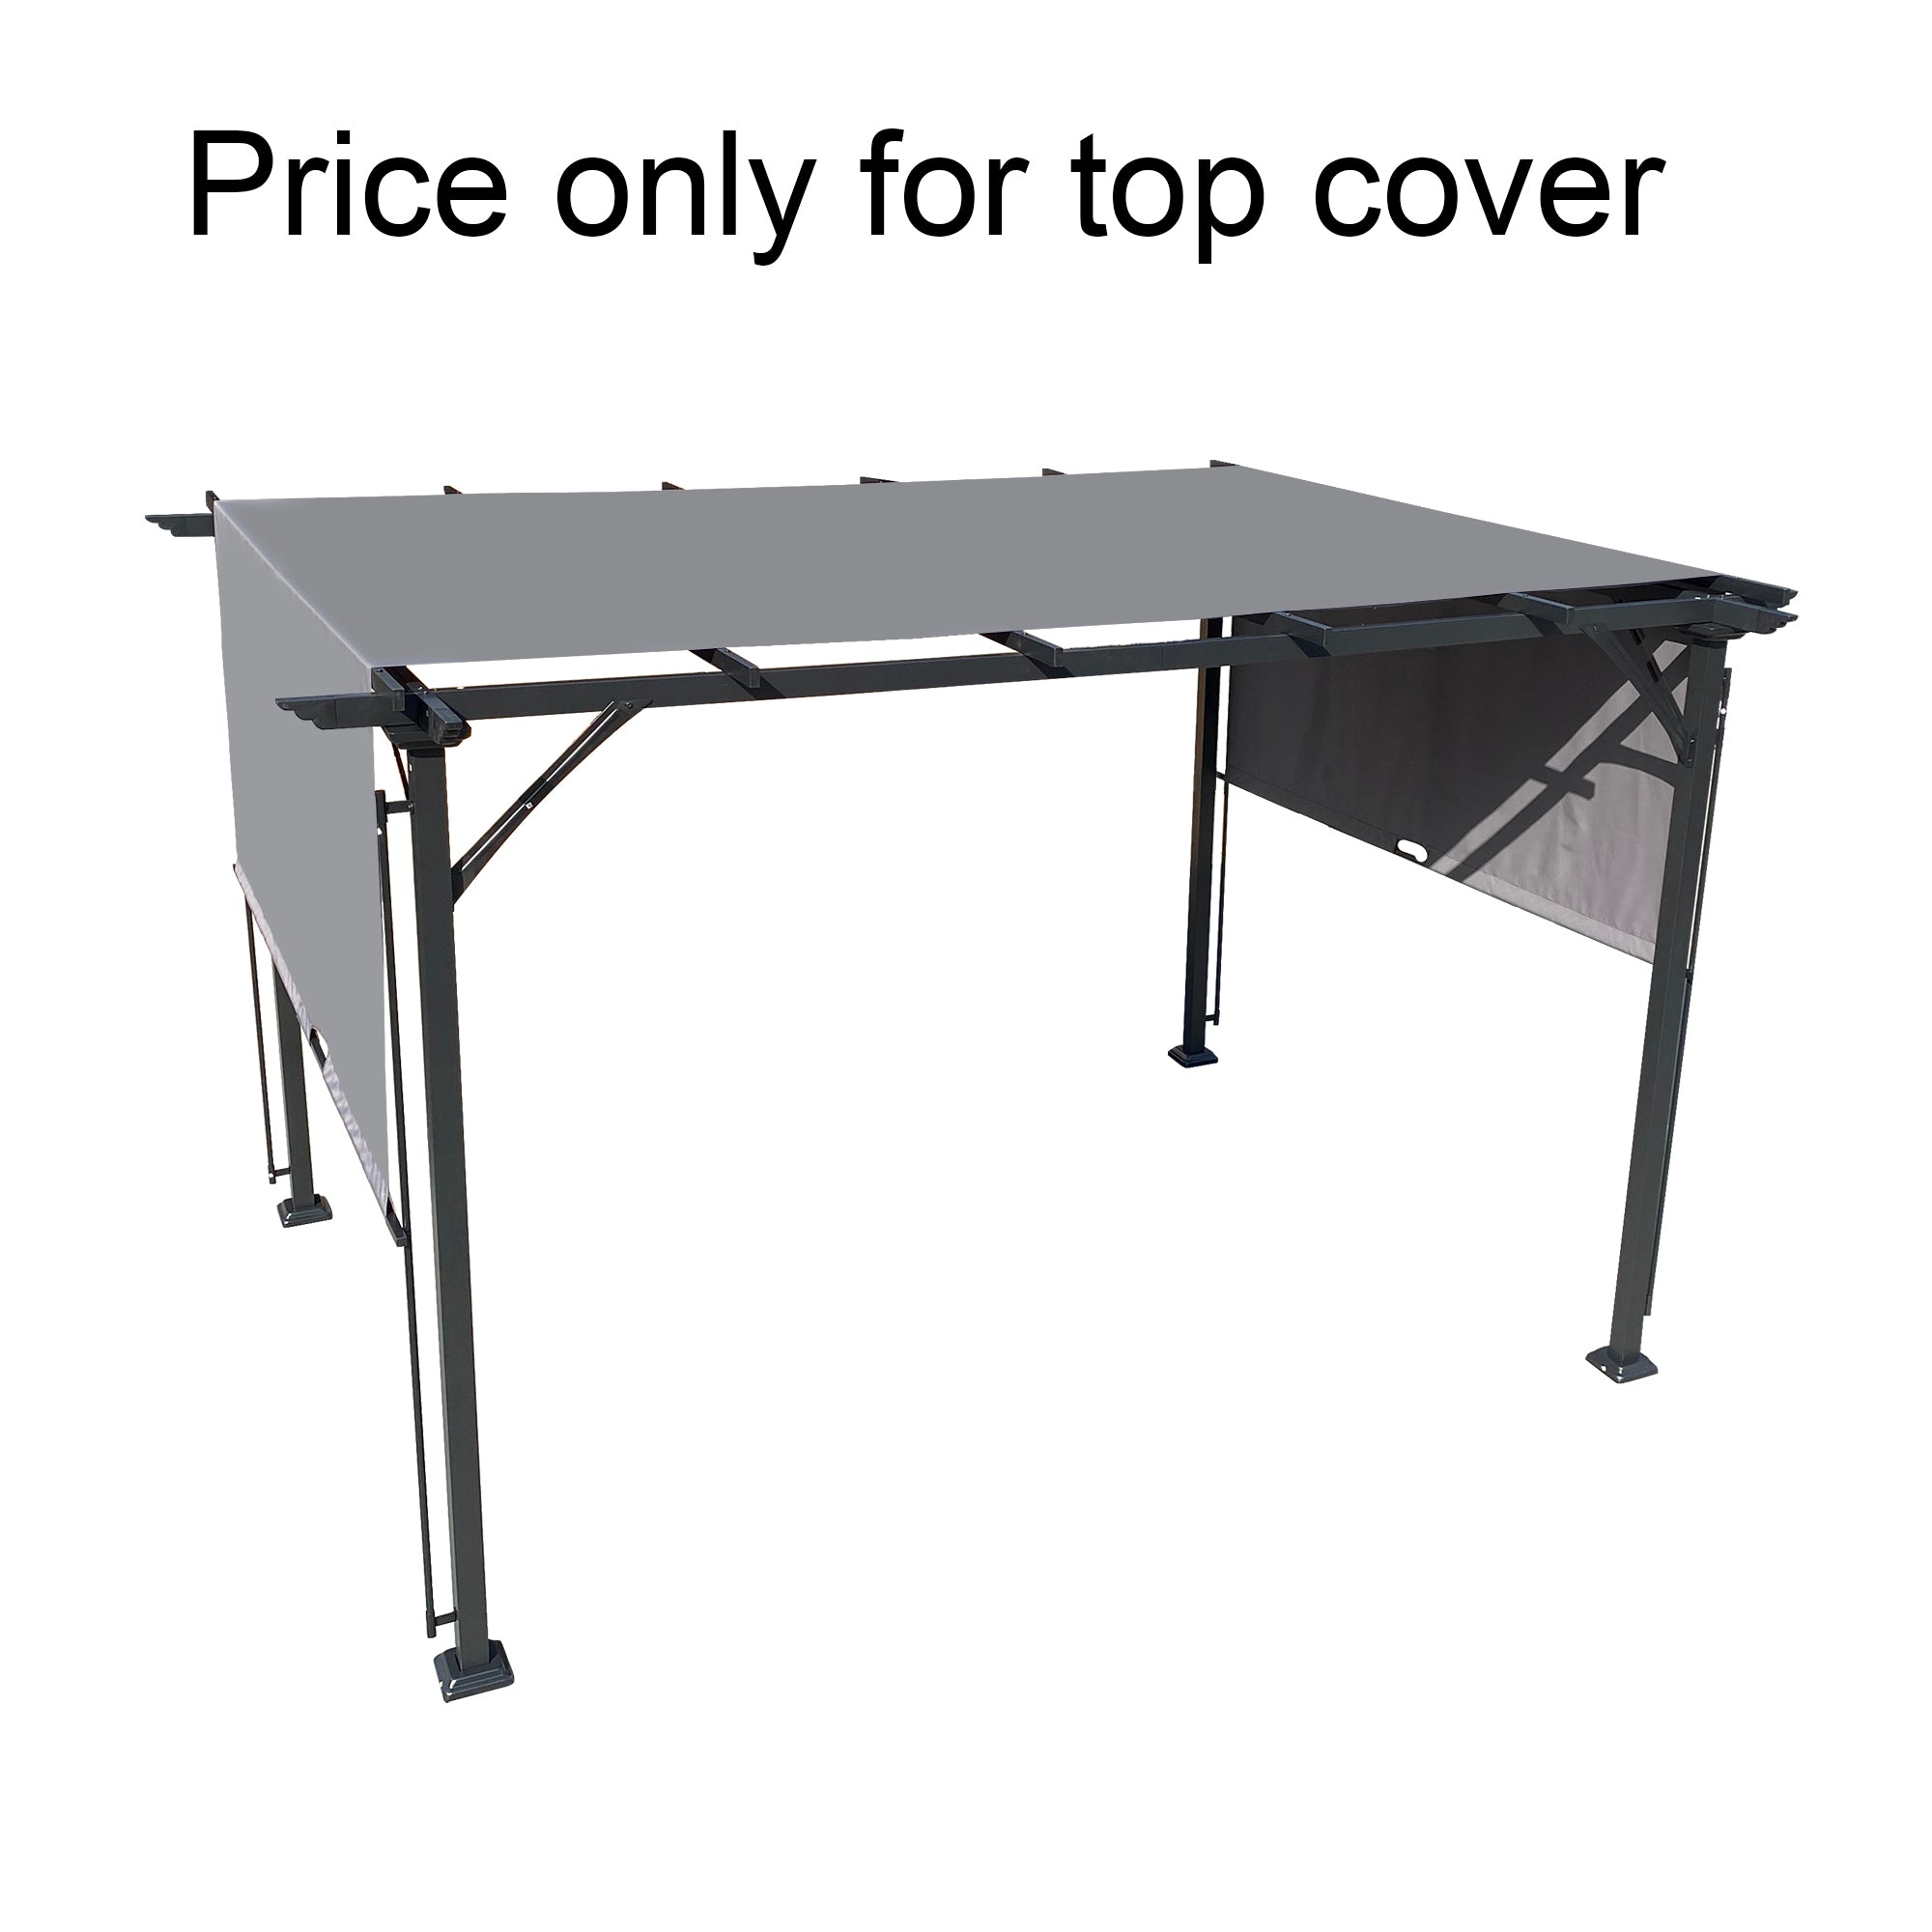 Universal Canopy Cover Replacement for 12x9 Ft Curved grey-polyester